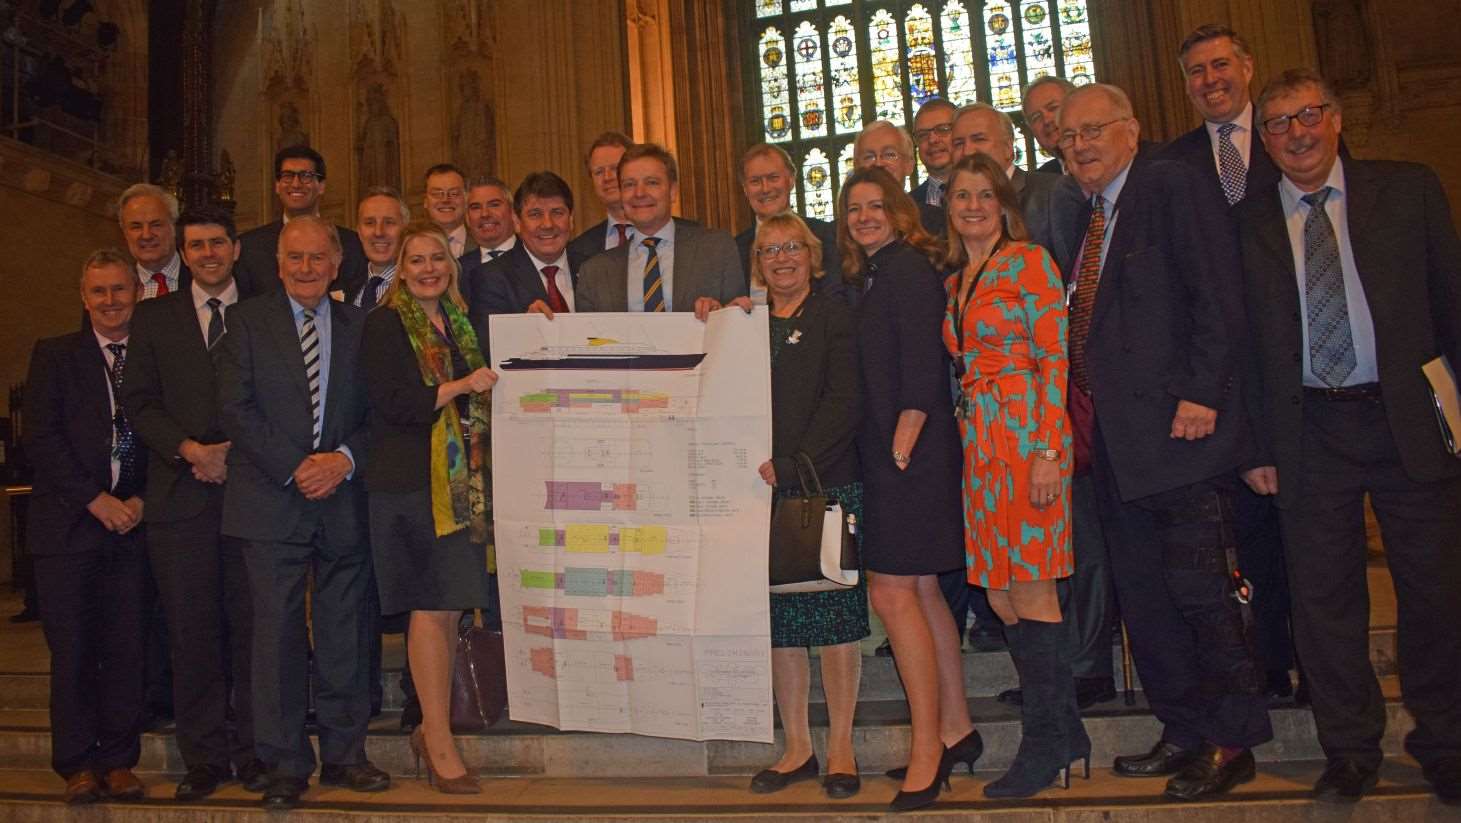 Photo-call of MPs in Westminster Hall with the plans for a new yacht